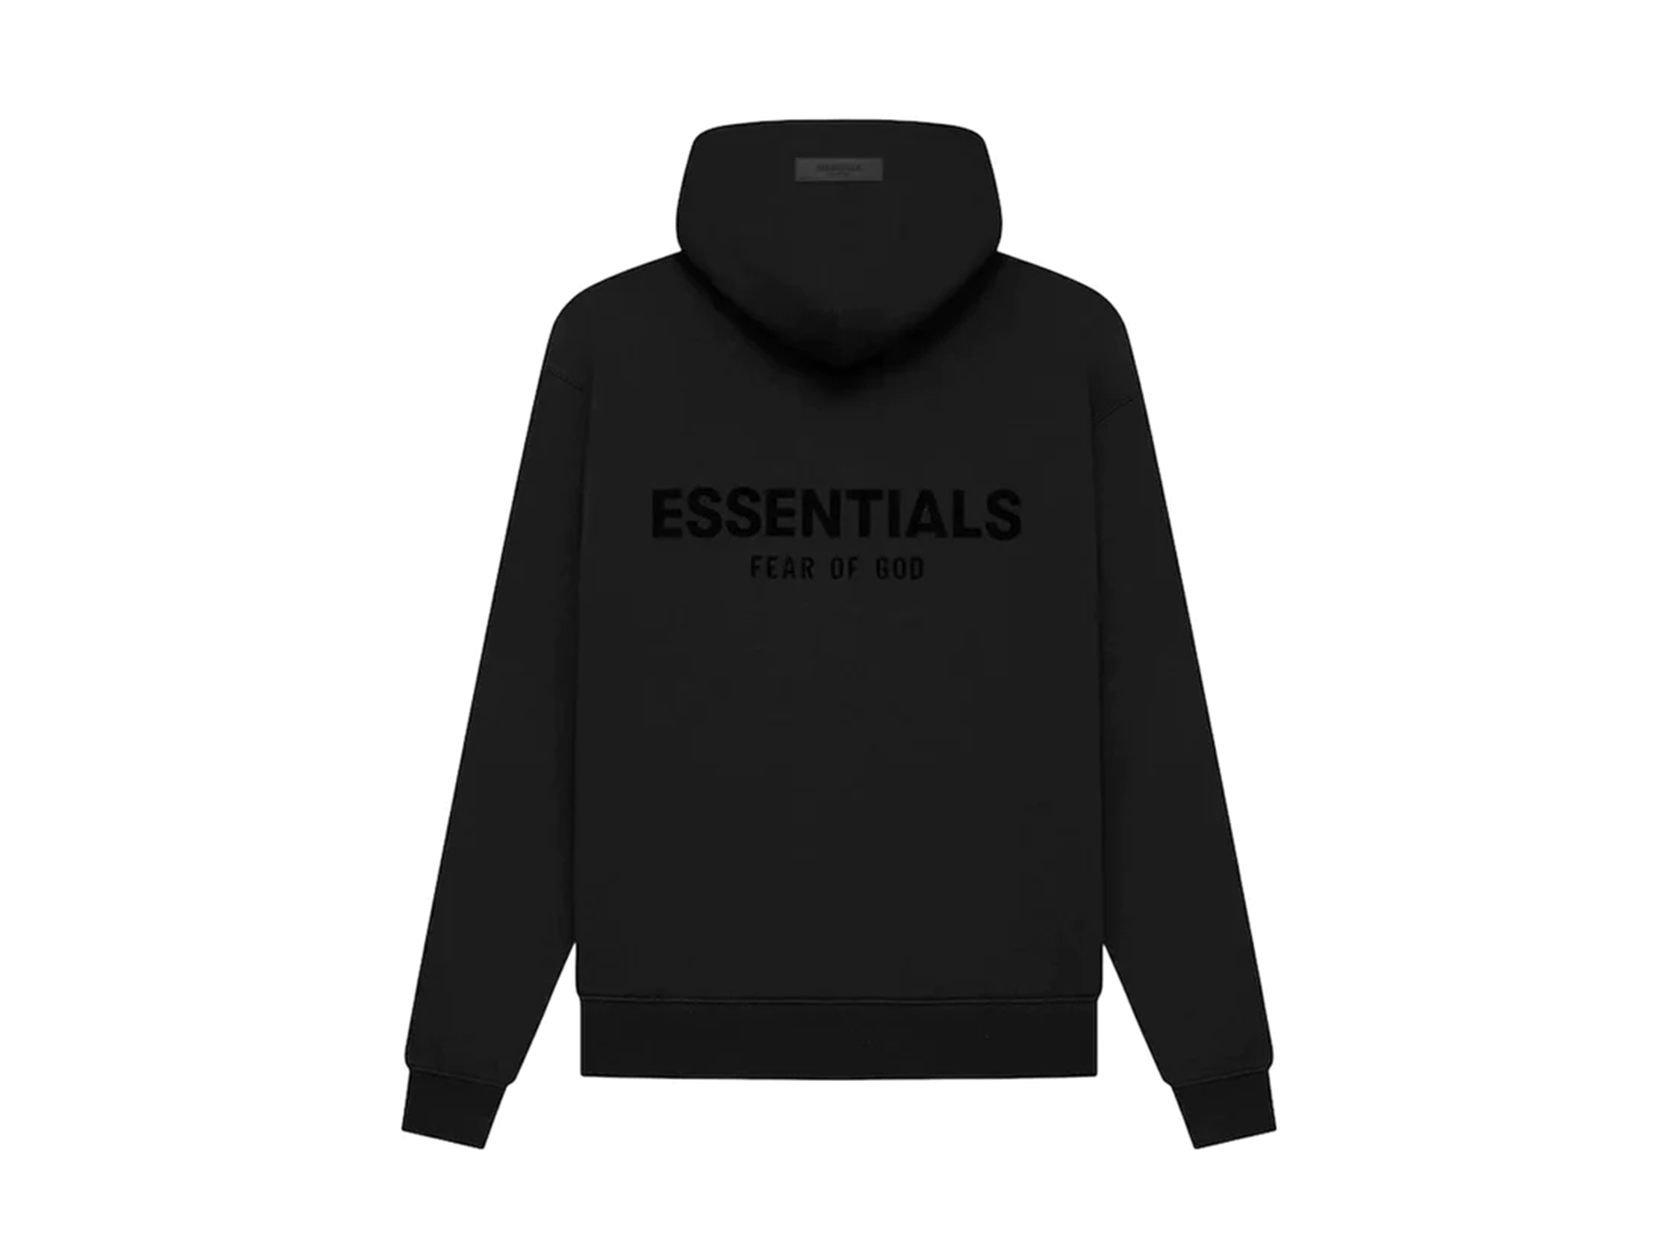 Double Boxed hoodie 184.99 FEAR OF GOD ESSENTIALS HOODIE STRETCH LIMO BLACK SS22 Double Boxed